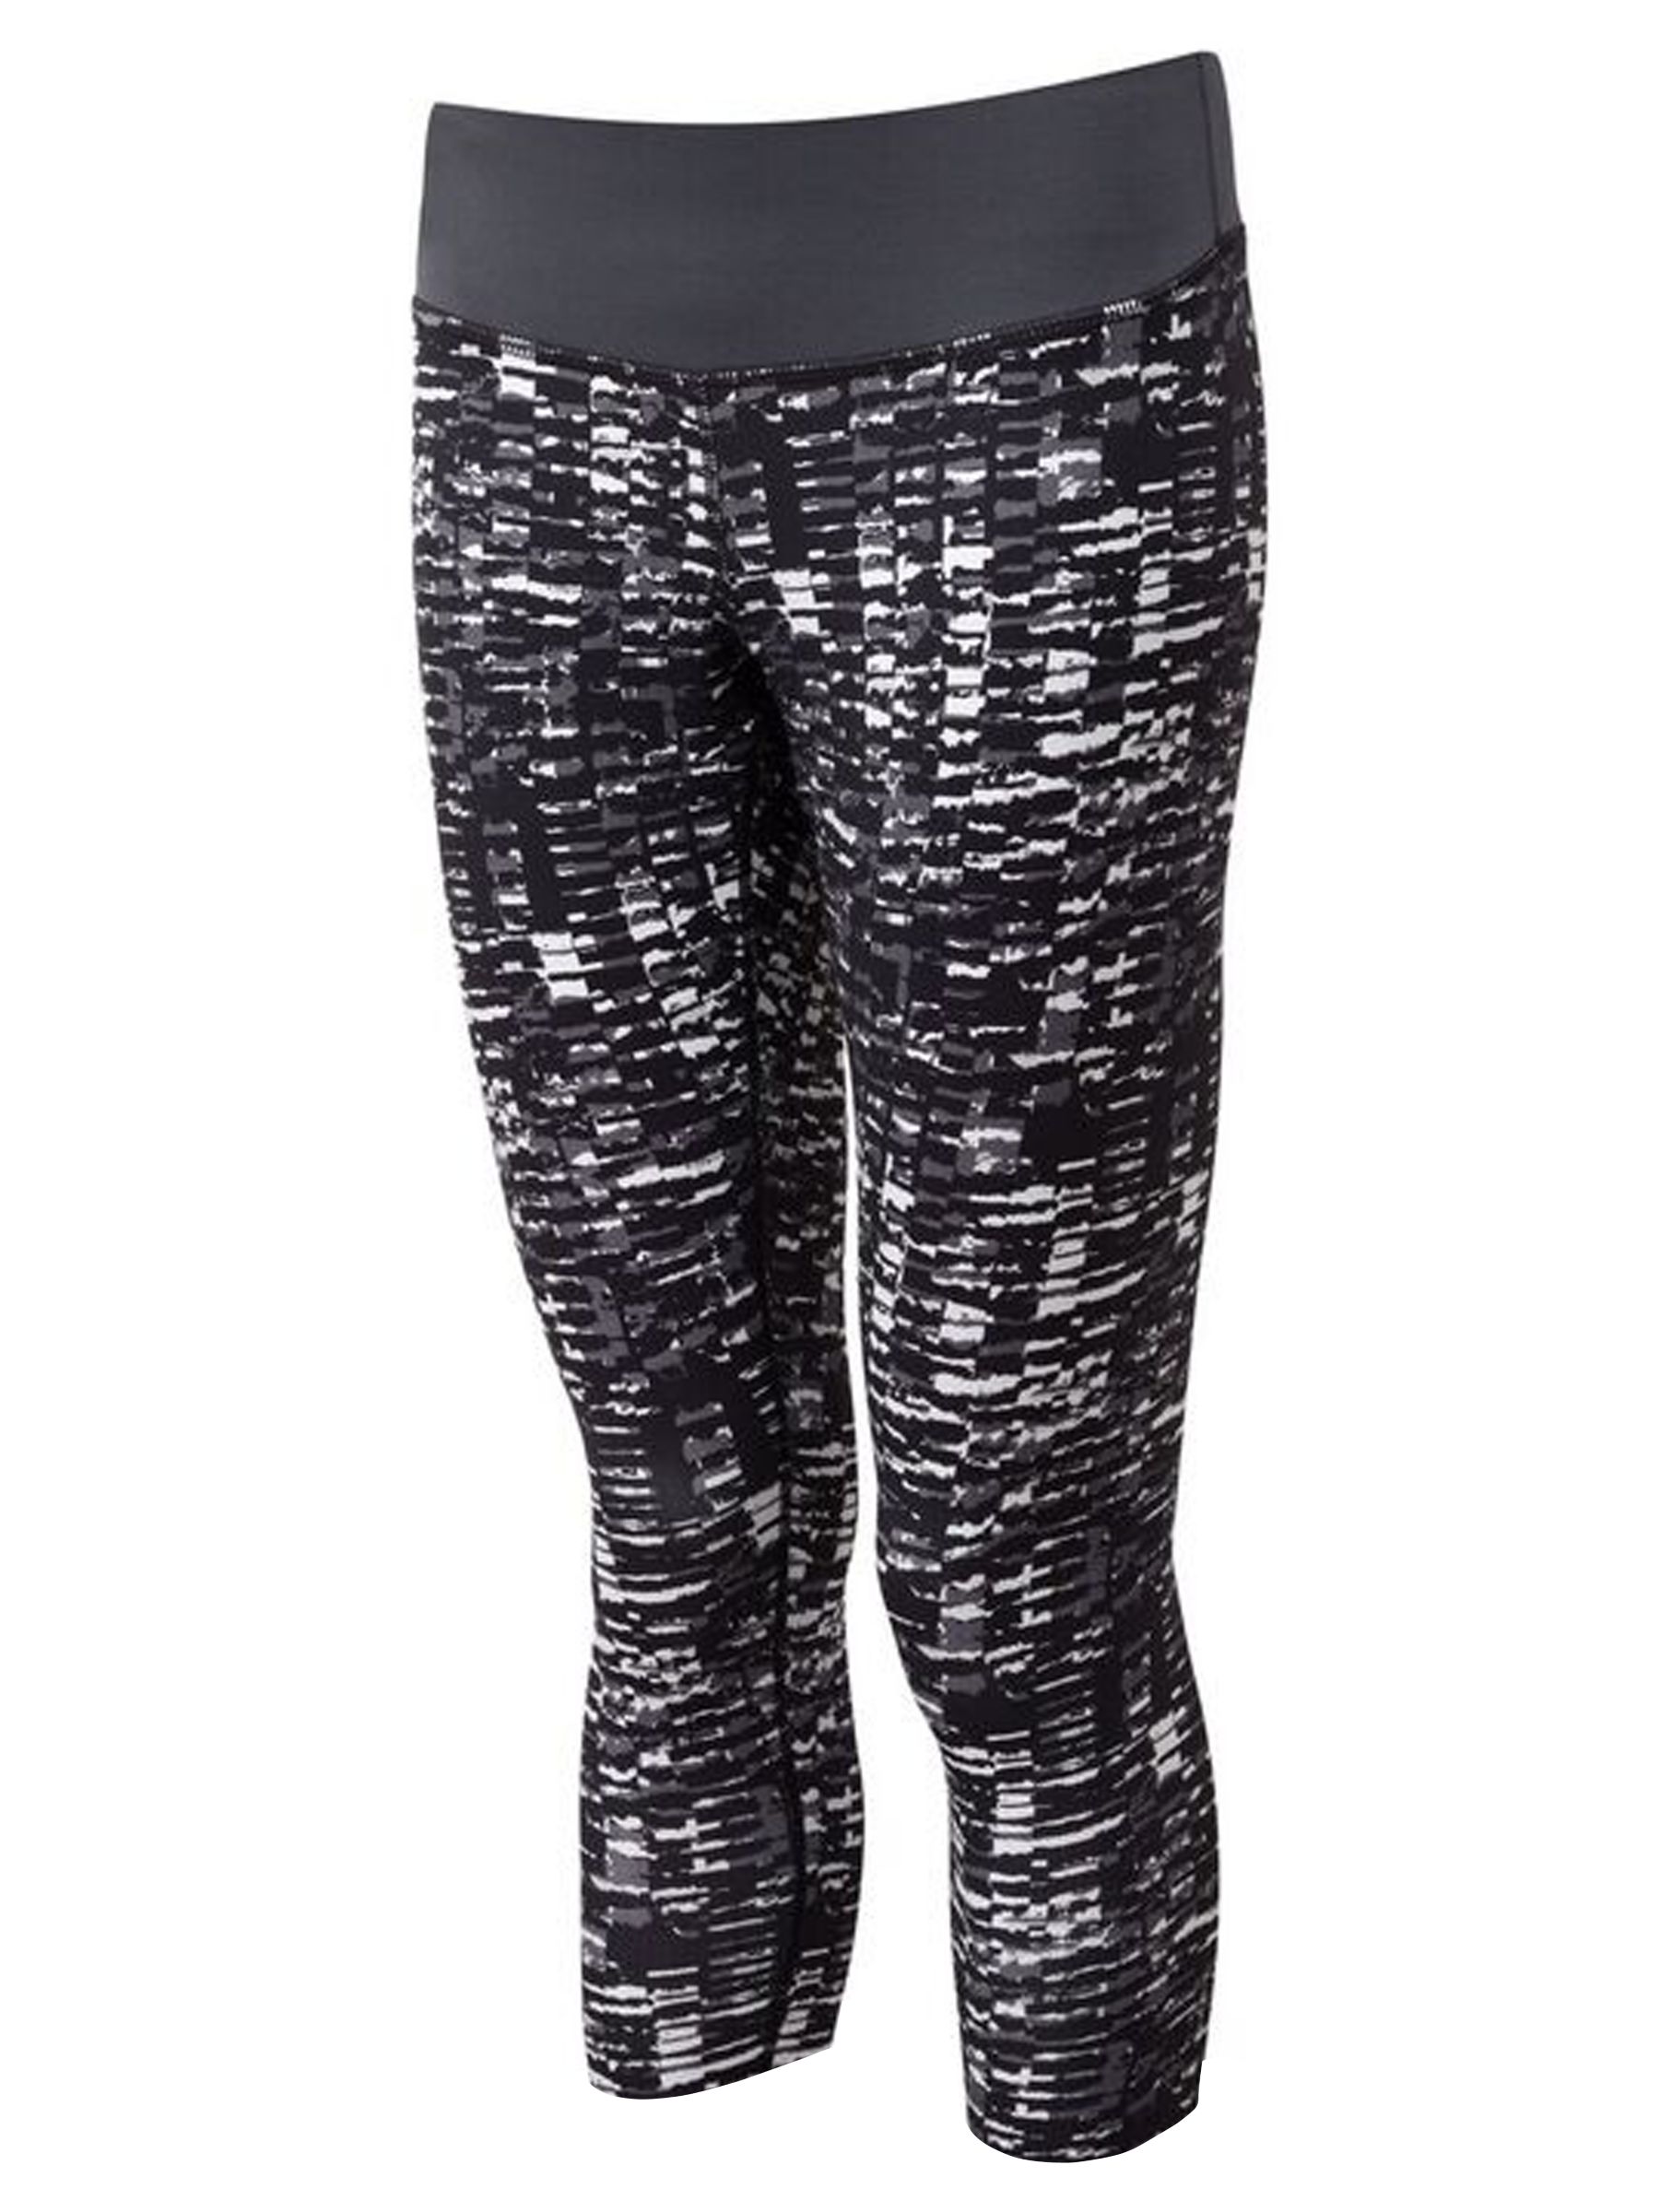 Ronhill Momentum Cropped Running Tights, Grey Sponge, 10